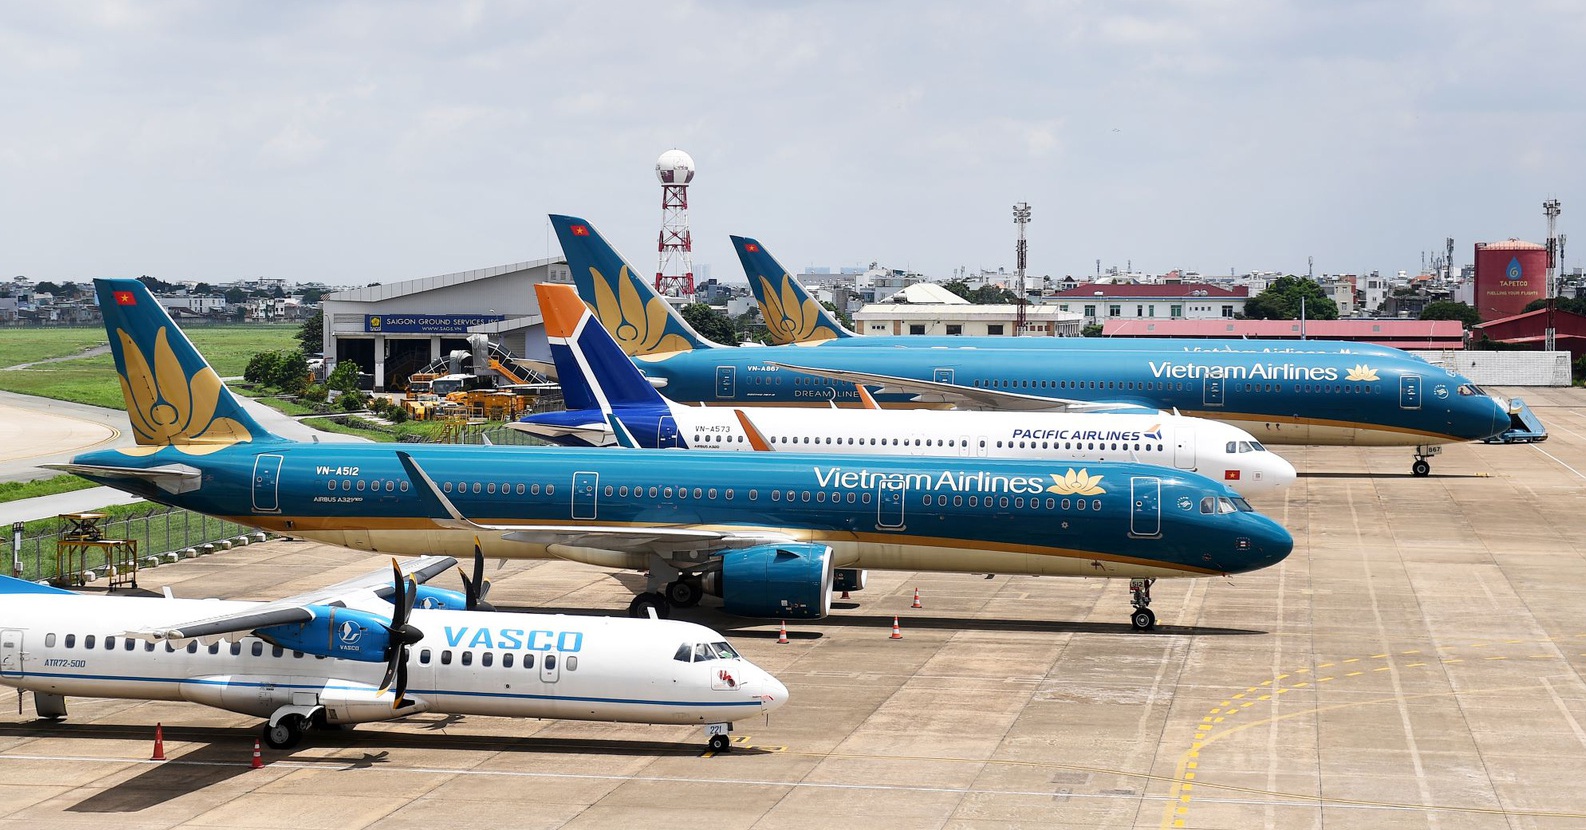 This is the reason why the Securities Commission did not agree with Vietnam Airlines to postpone the publication of financial statements